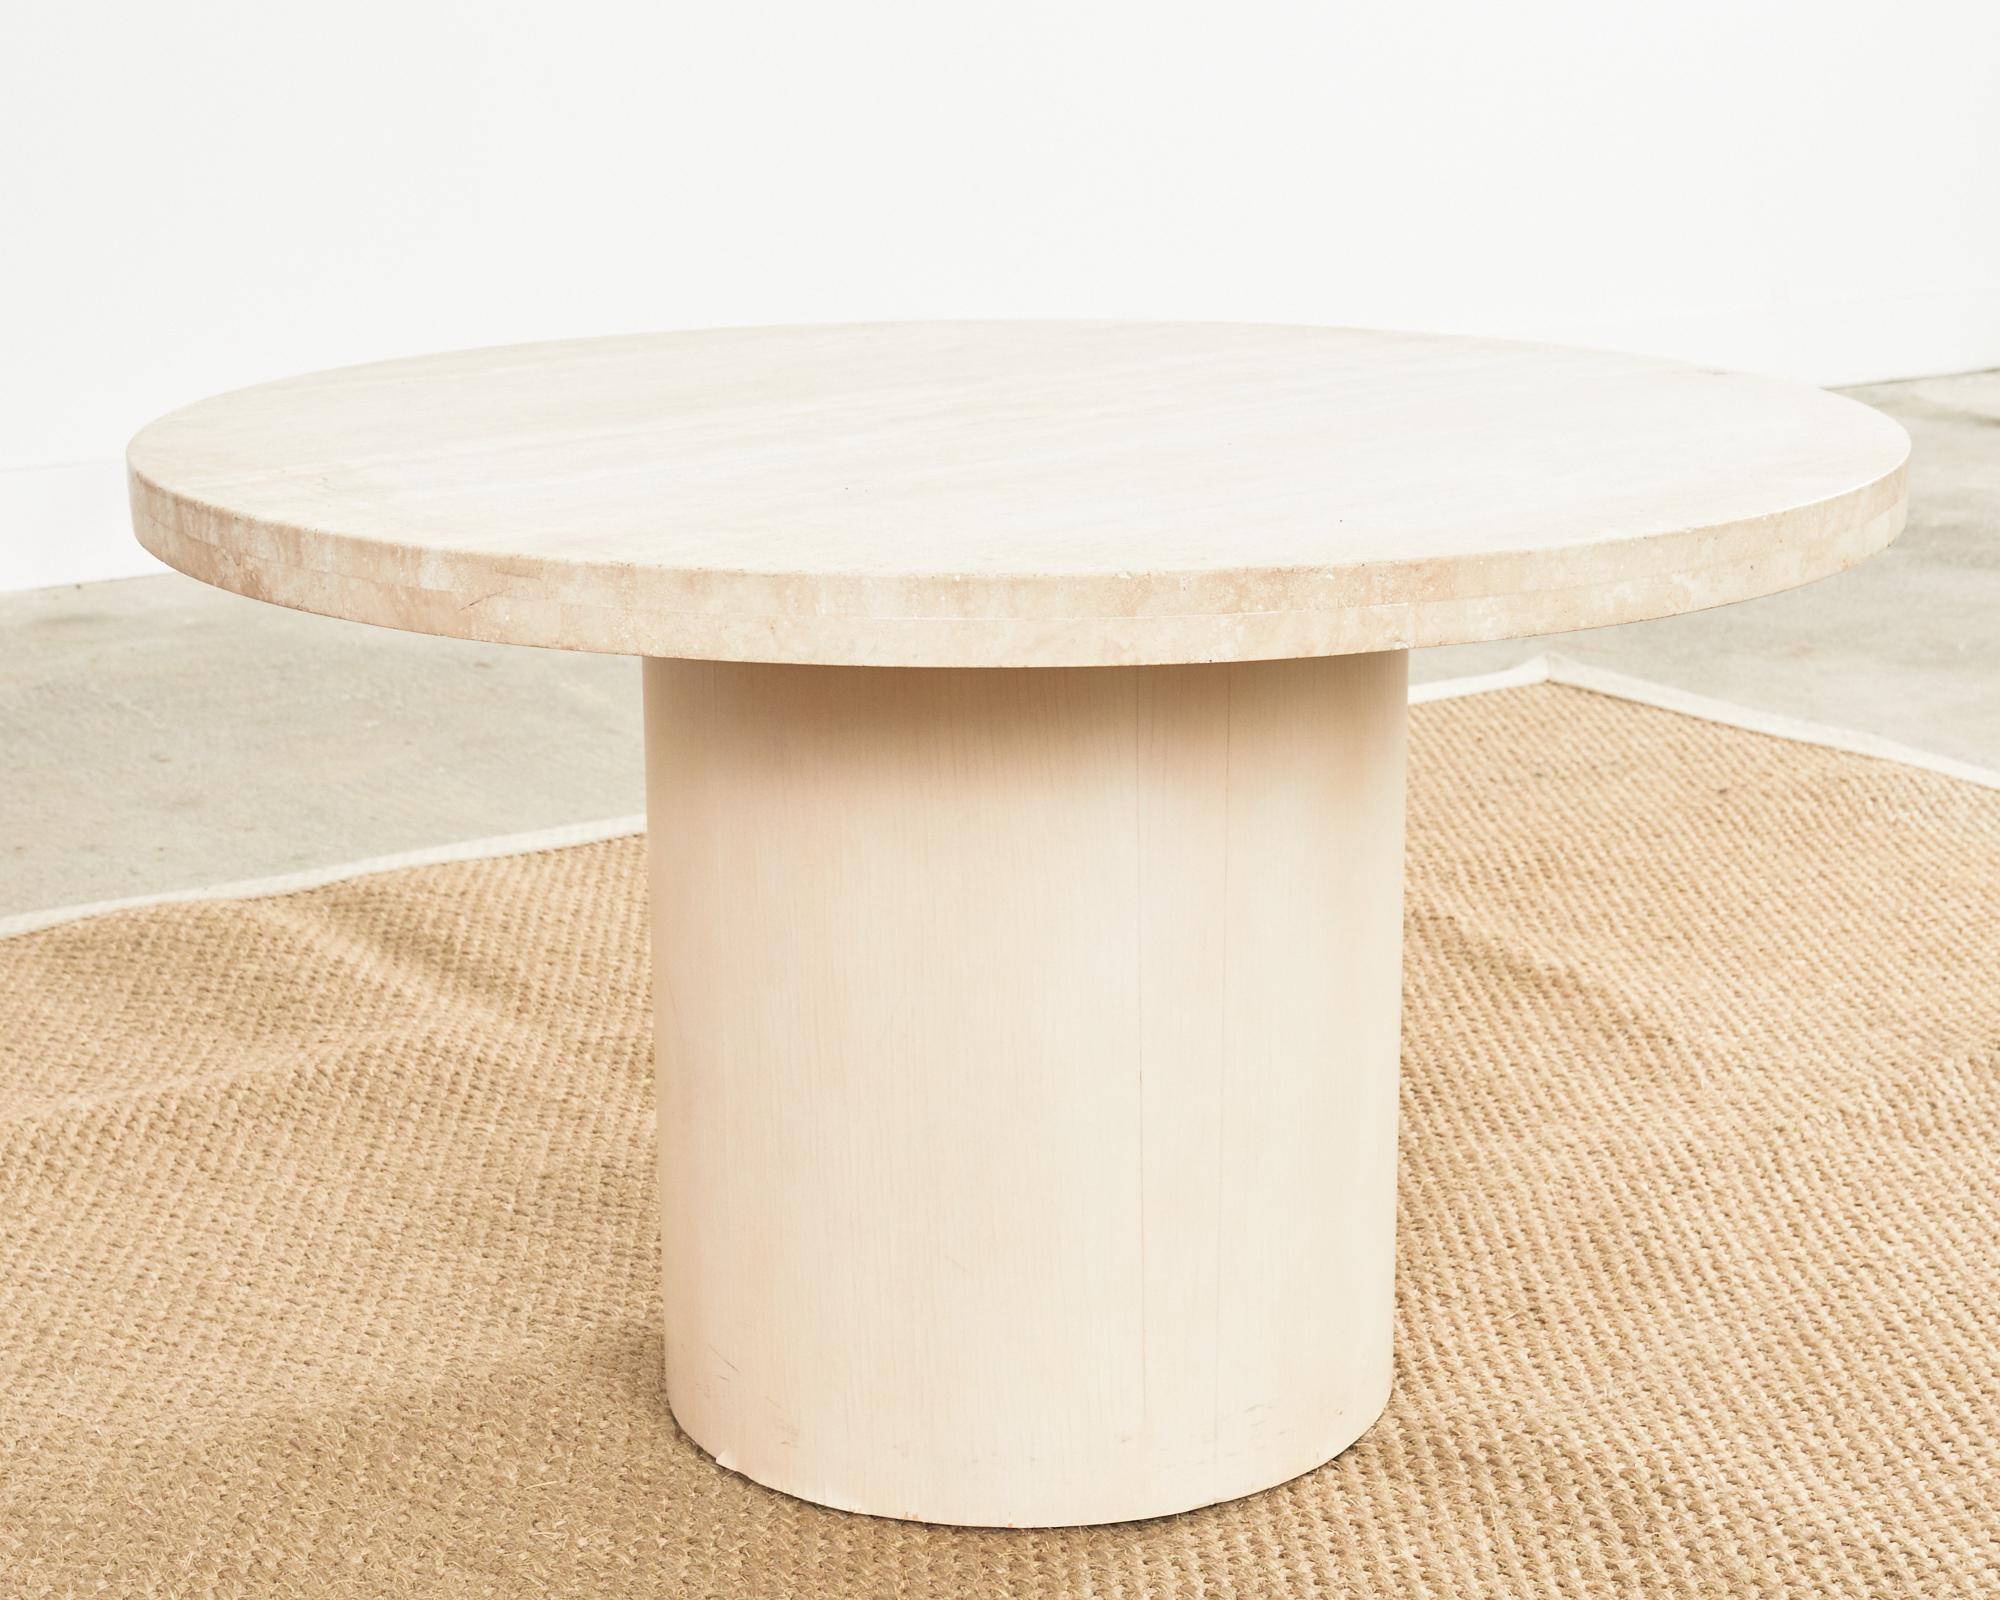 Dreamy Mid-Century Modern Italian cocktail or coffee pedestal table featuring a 1.5 inch thick round travertine top. The travertine has a creamy white and beige veining and is mounted on top of a round wooden pedestal base with a cream colored